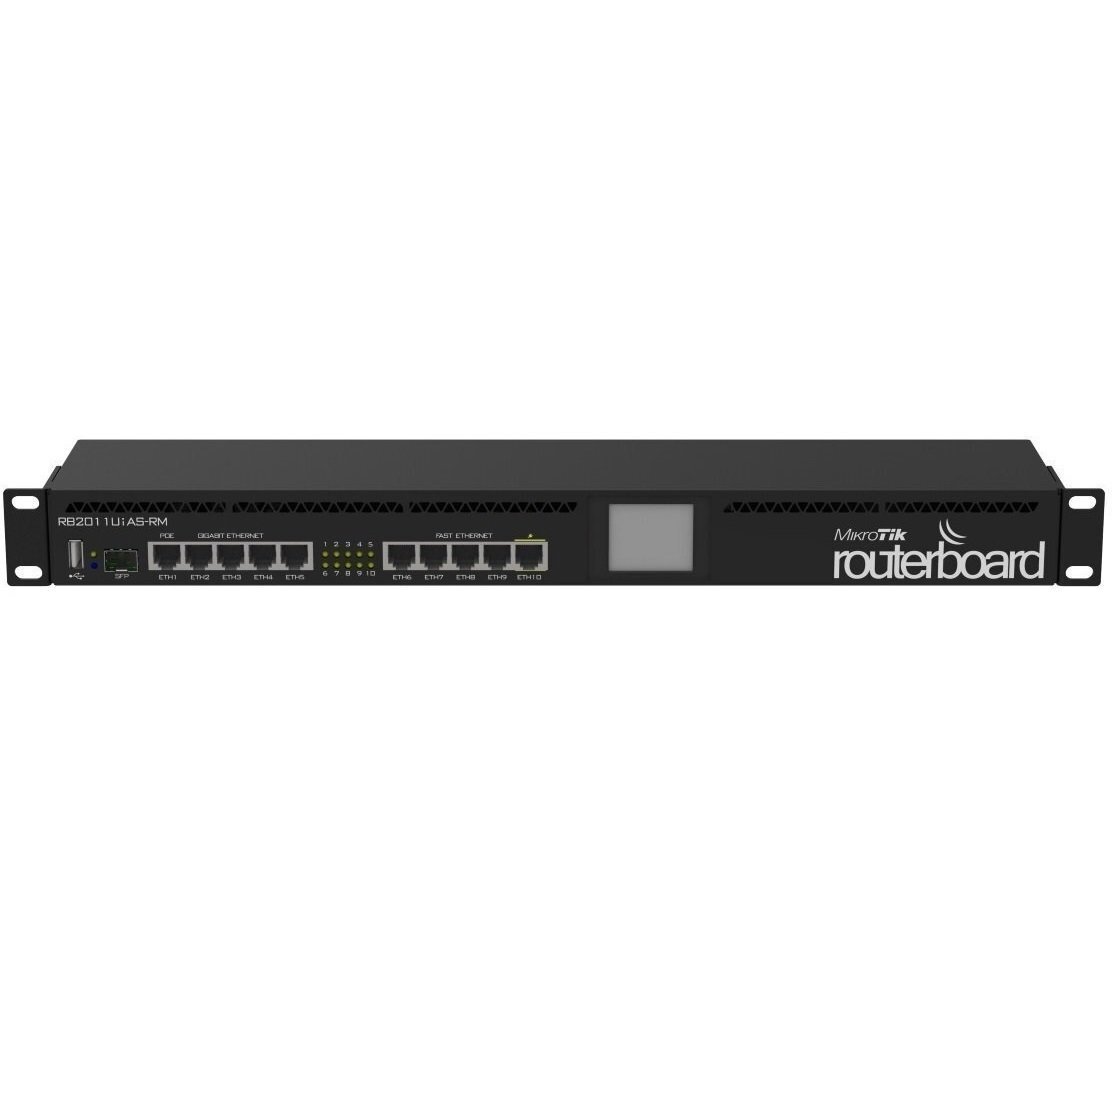 Маршрутизатор MikroTik RouterBOARD 2011UiAS 5xFE, 5xGE, 1xSFP, RouterOS L5, LCD panel, rack (RB2011UIAS-RM) фото 1